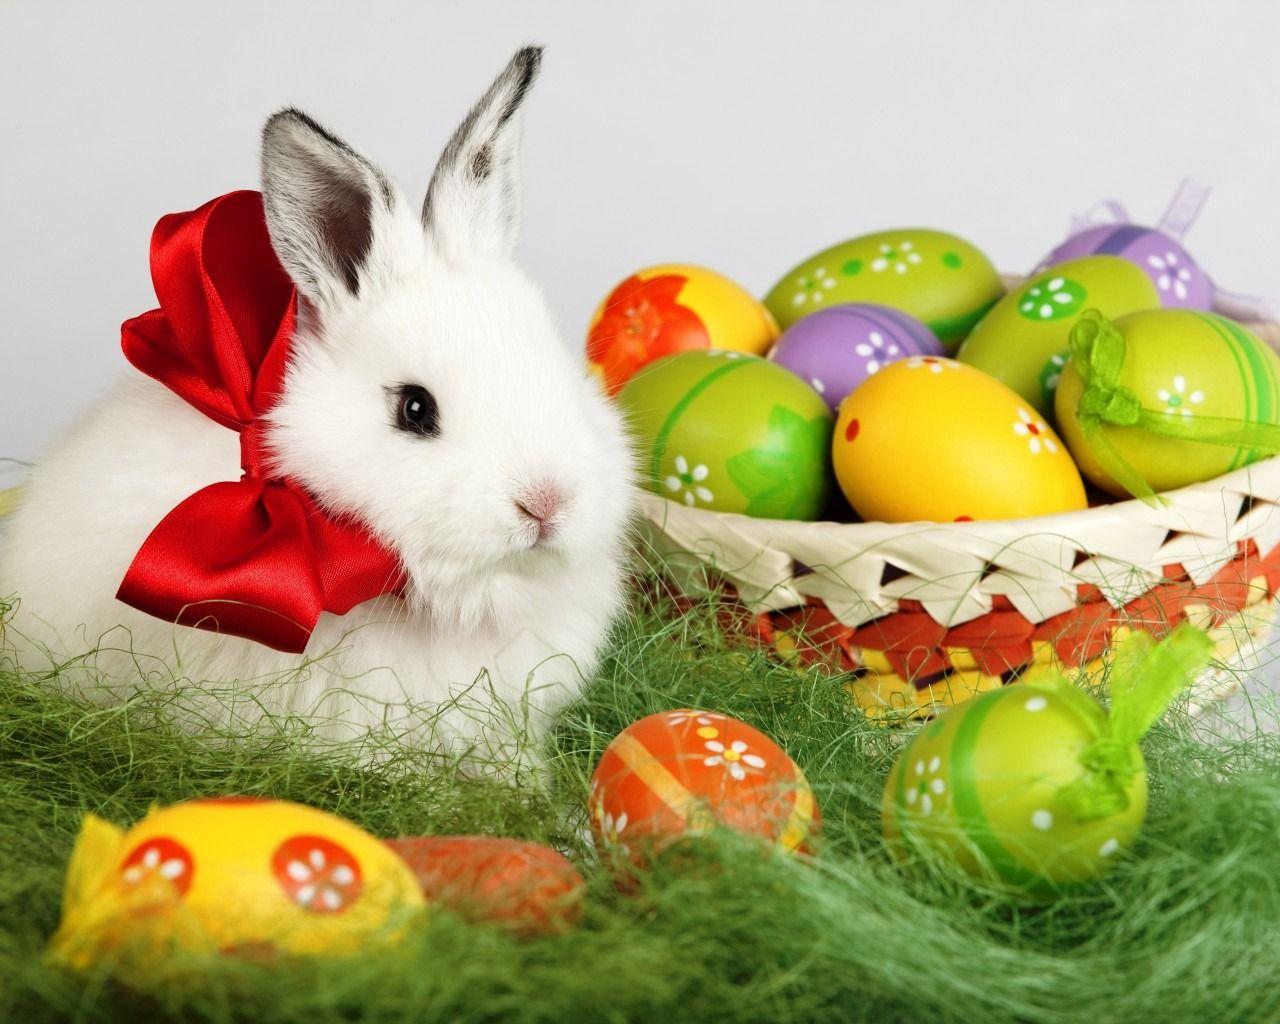 Cute Easter Bunny Wallpaper. Happy easter wallpaper, Easter bunny image, Easter wallpaper